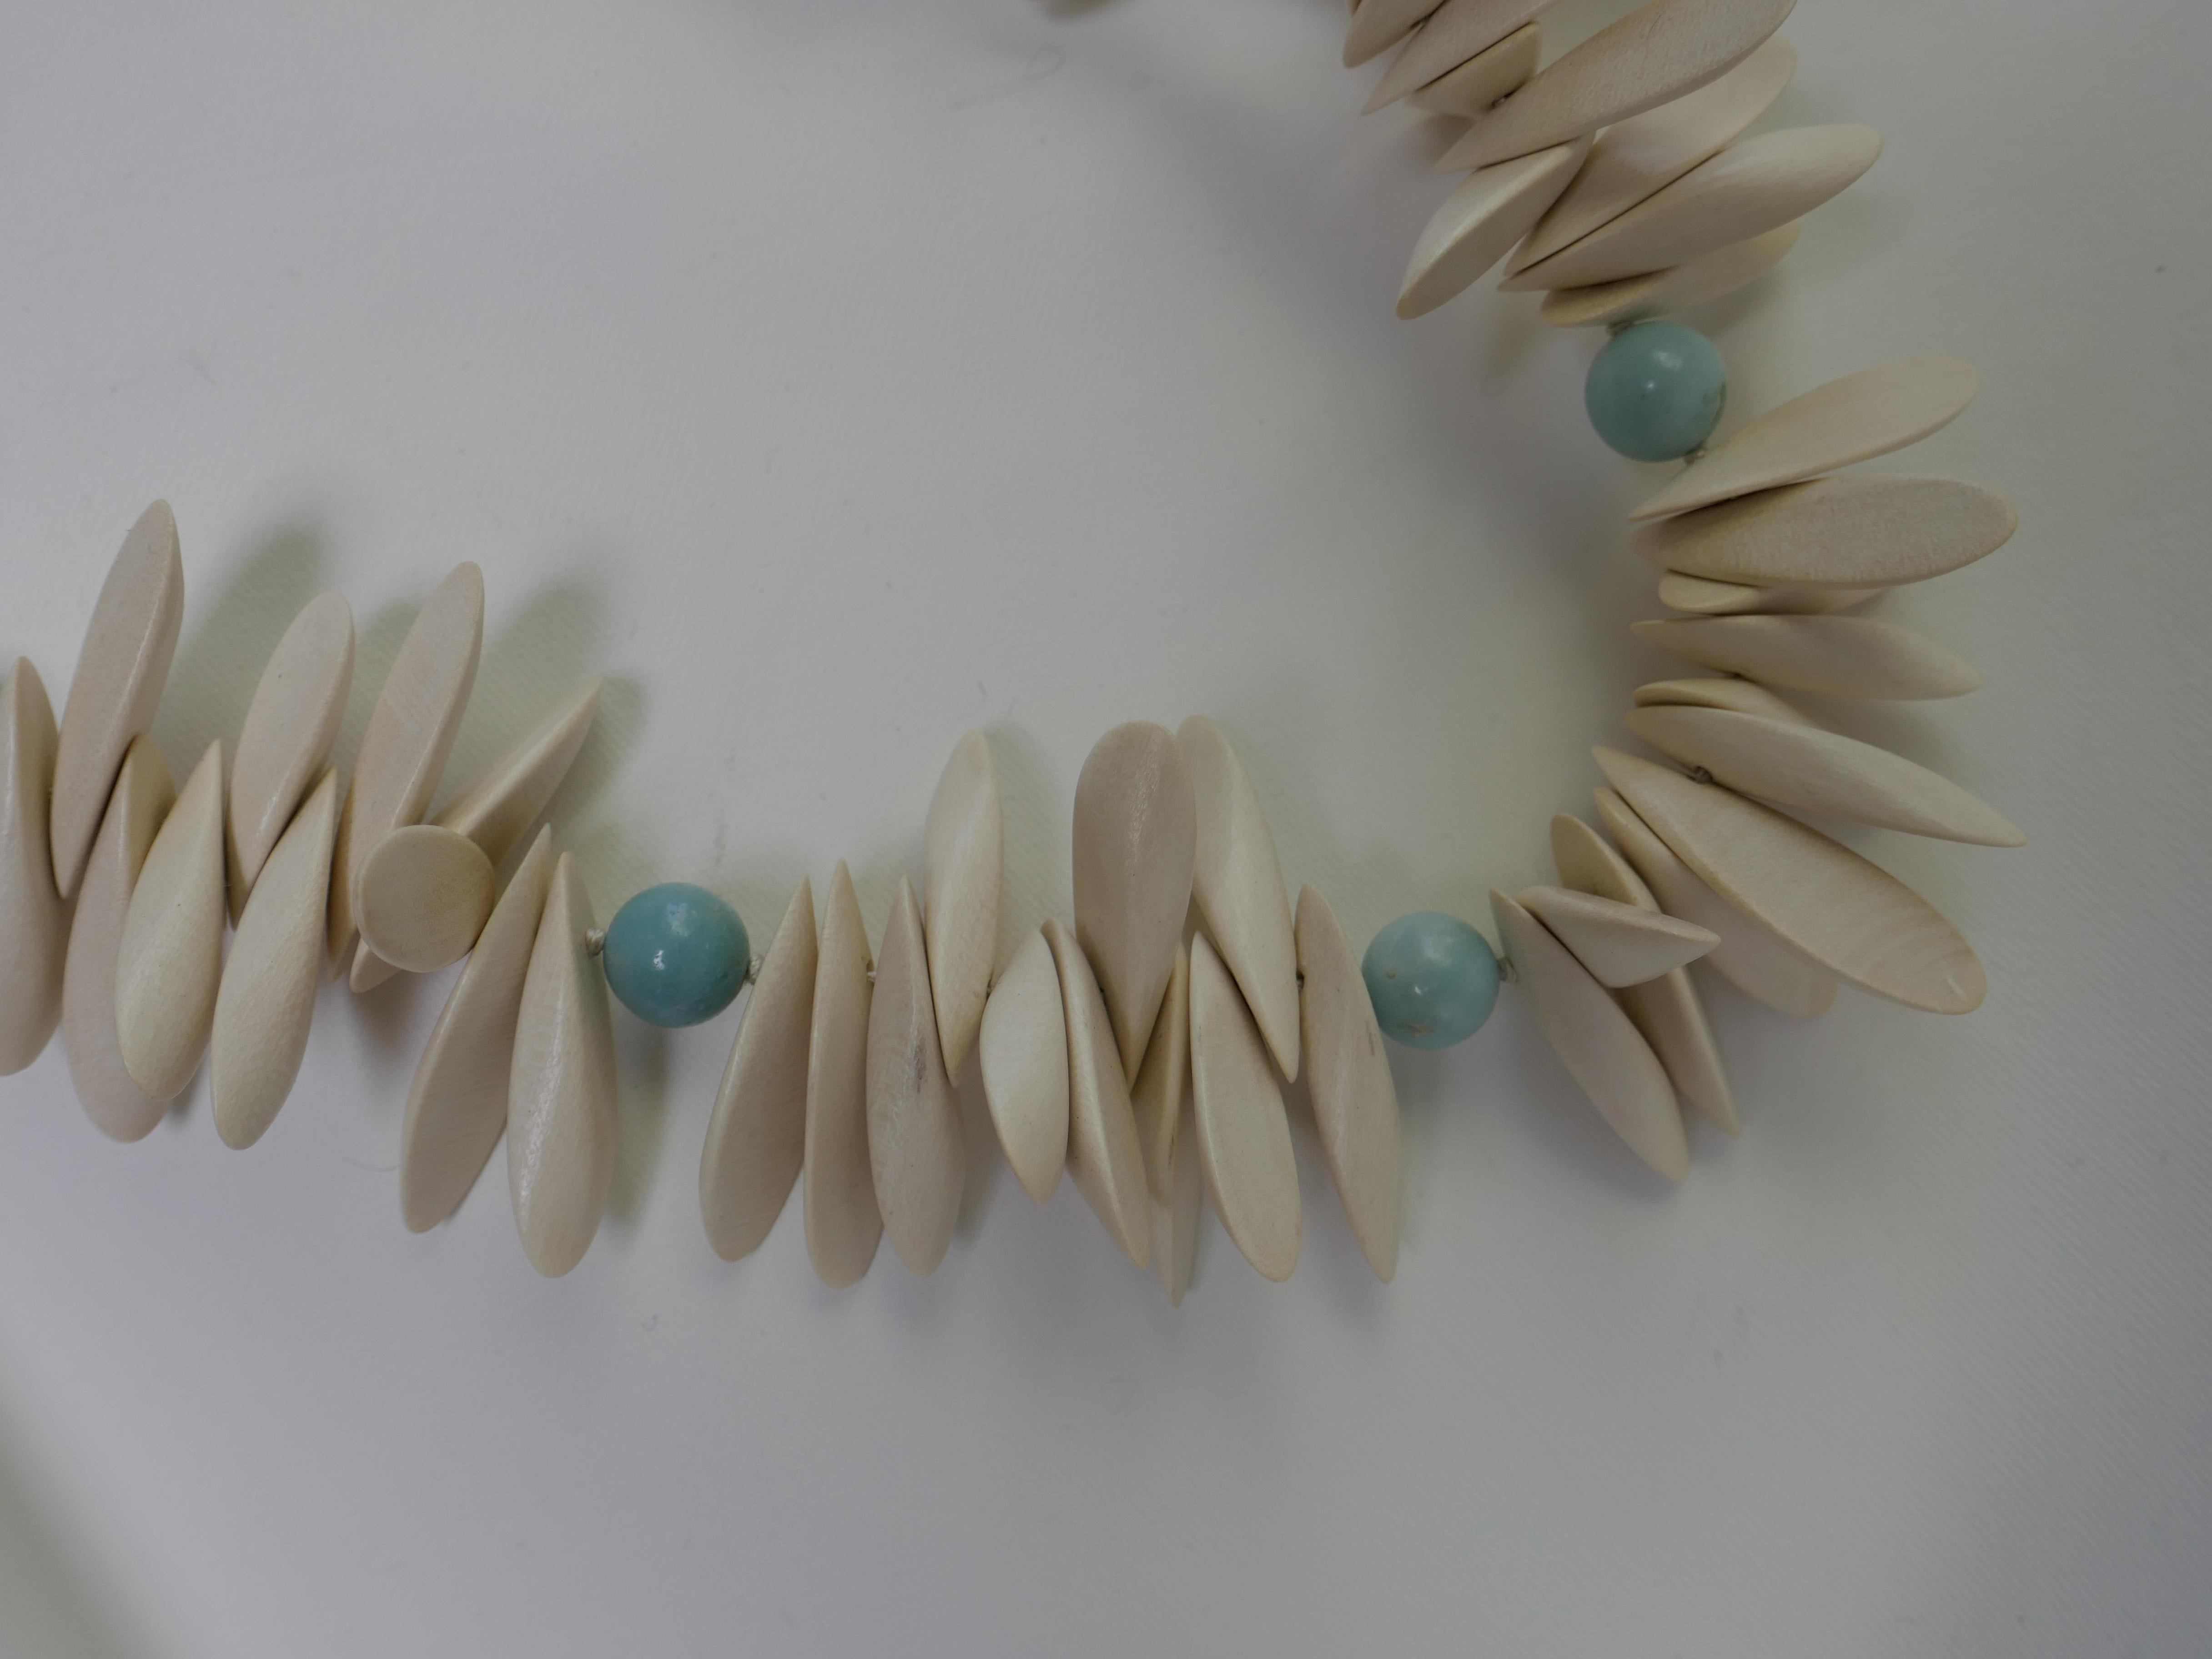 This necklace is a combination of white panto wood beads and 10mm amazonite beads with a 925 sterling silver closure. It is a very wearable necklace, unusual and fun. It is knotted silk thread. The necklace was designed and created by Lucy de la